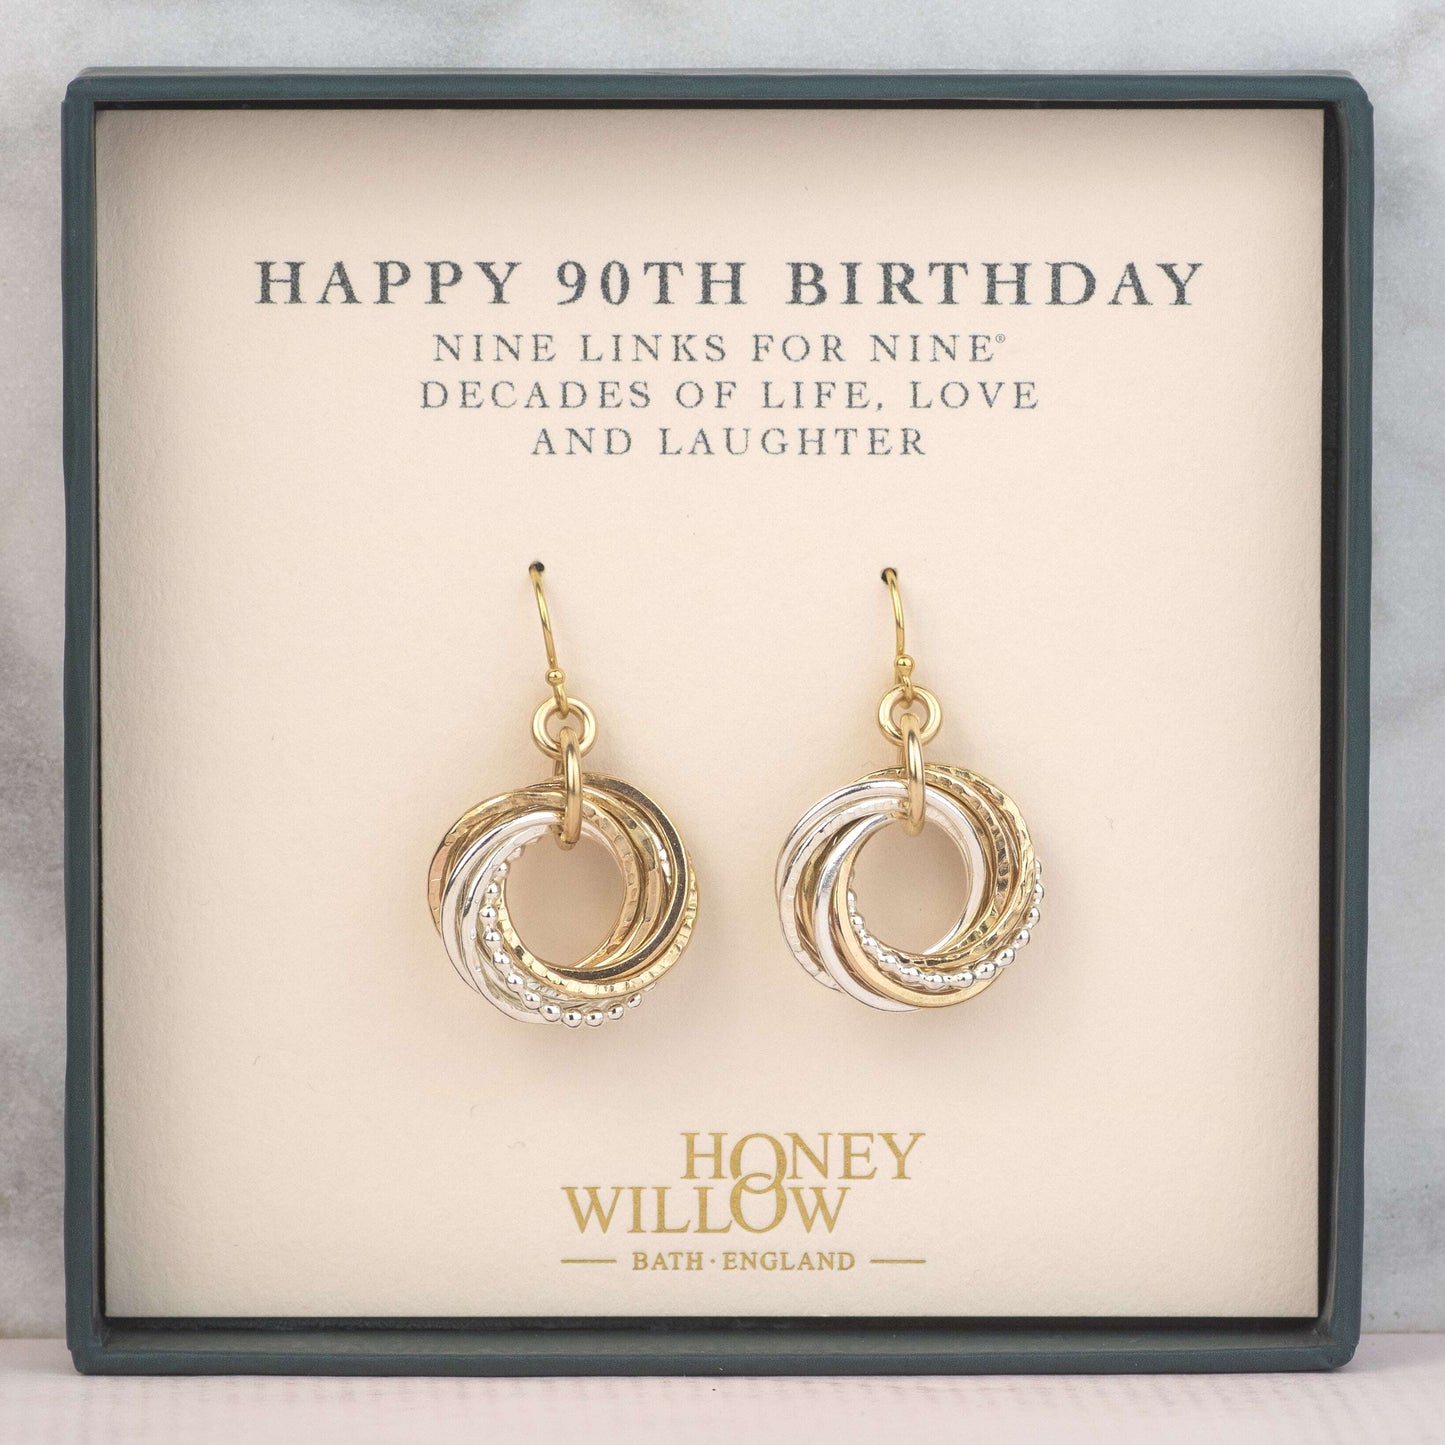 90th Birthday Earrings - Petite Mixed Metal - 9 Links for 9 Decades Earrings